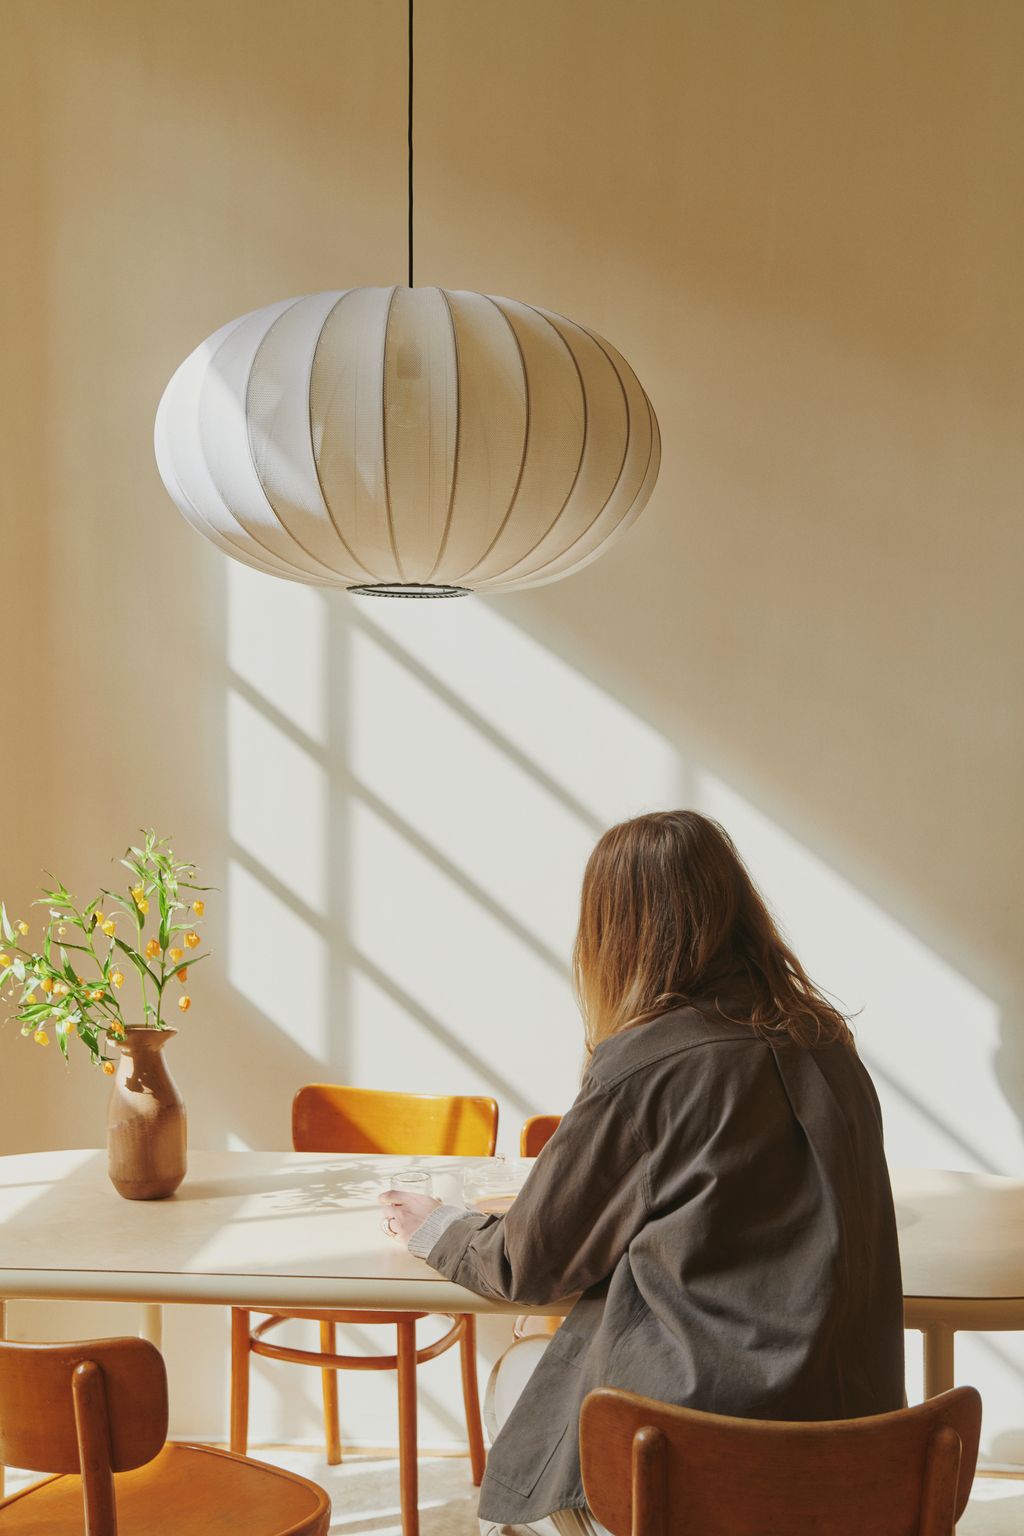 Made By Hand Sticka med 76 Oval Pendant Lamp, Sand Stone